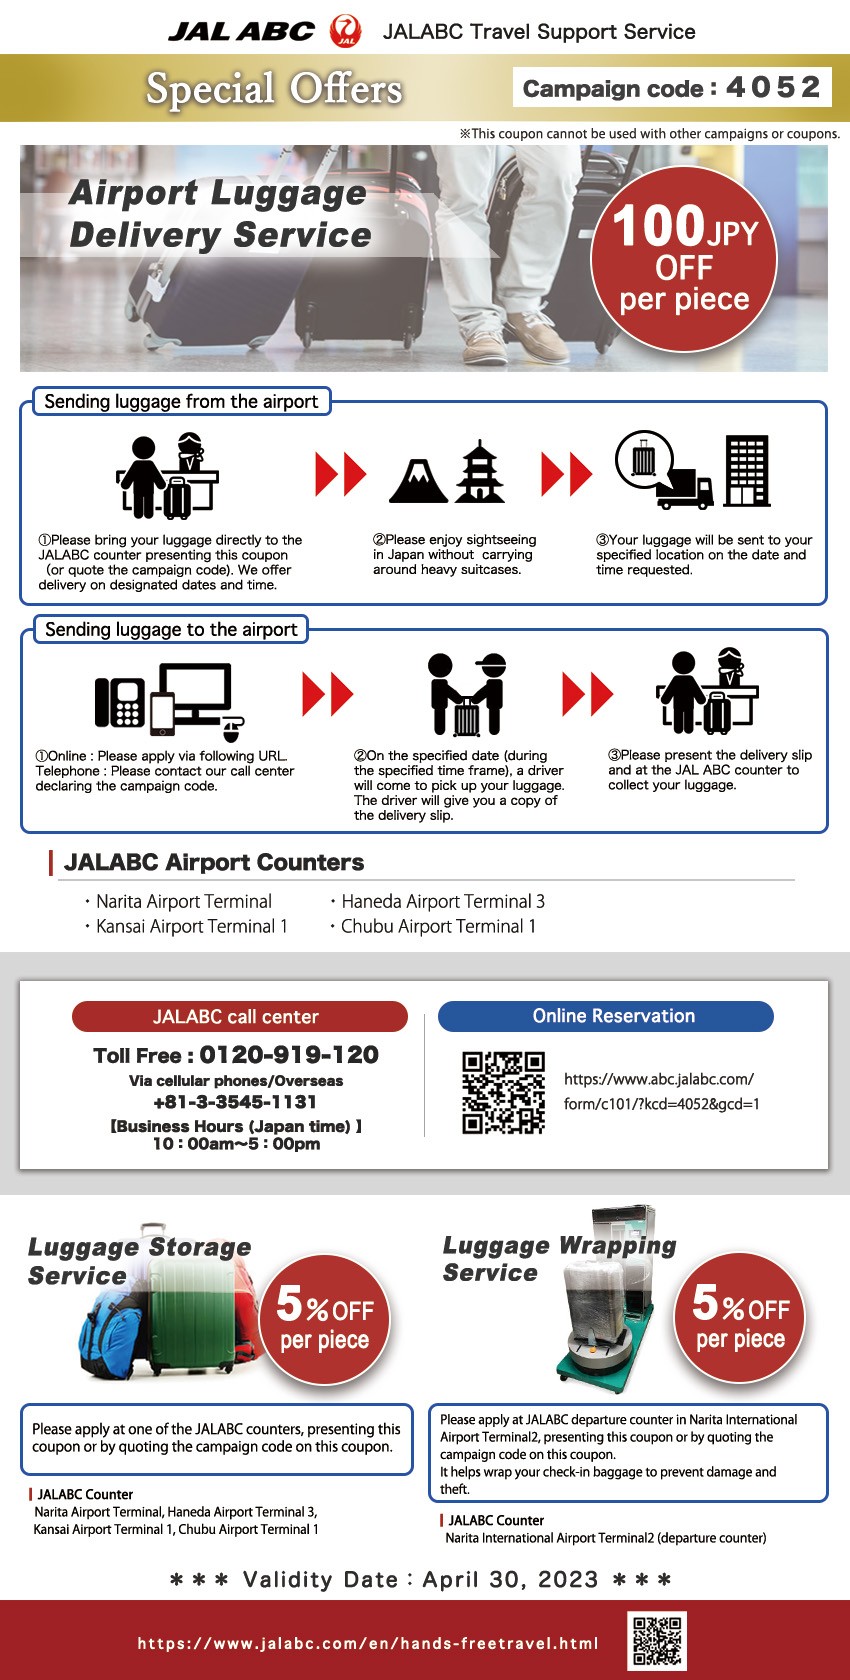 Luggage Delivery, Wi-Fi Rental, and SIM Services all Cheaper than Ever - The Brand New JAL ABC Coupon Usable at All Major Japanese Airports!